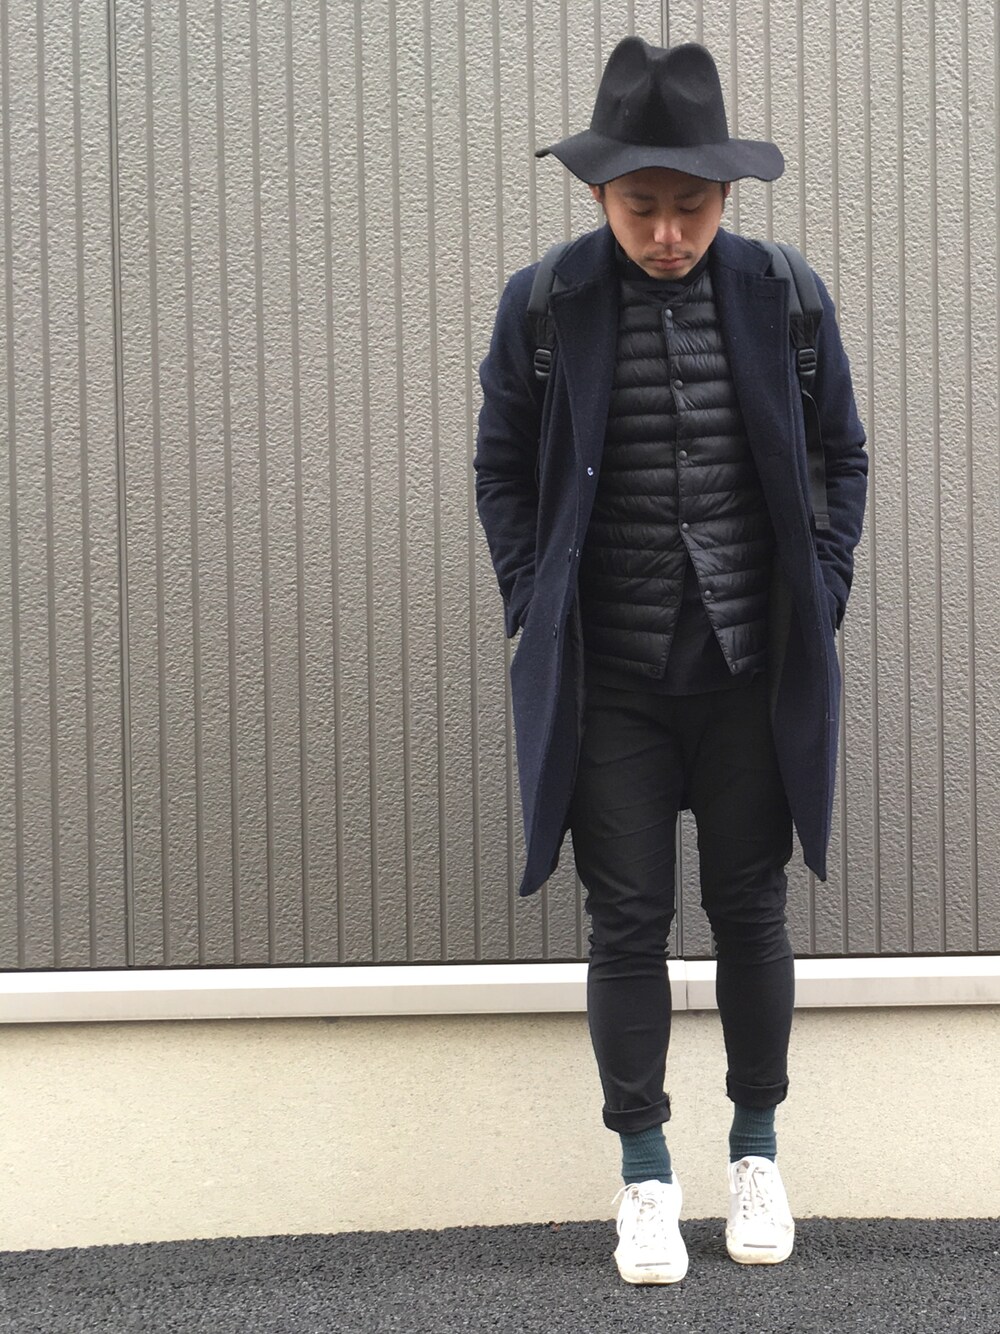 ShiNichiさんの「CONVERSE / LEATHER JACK PURCELL（JACK PURCELL）」を使ったコーディネート